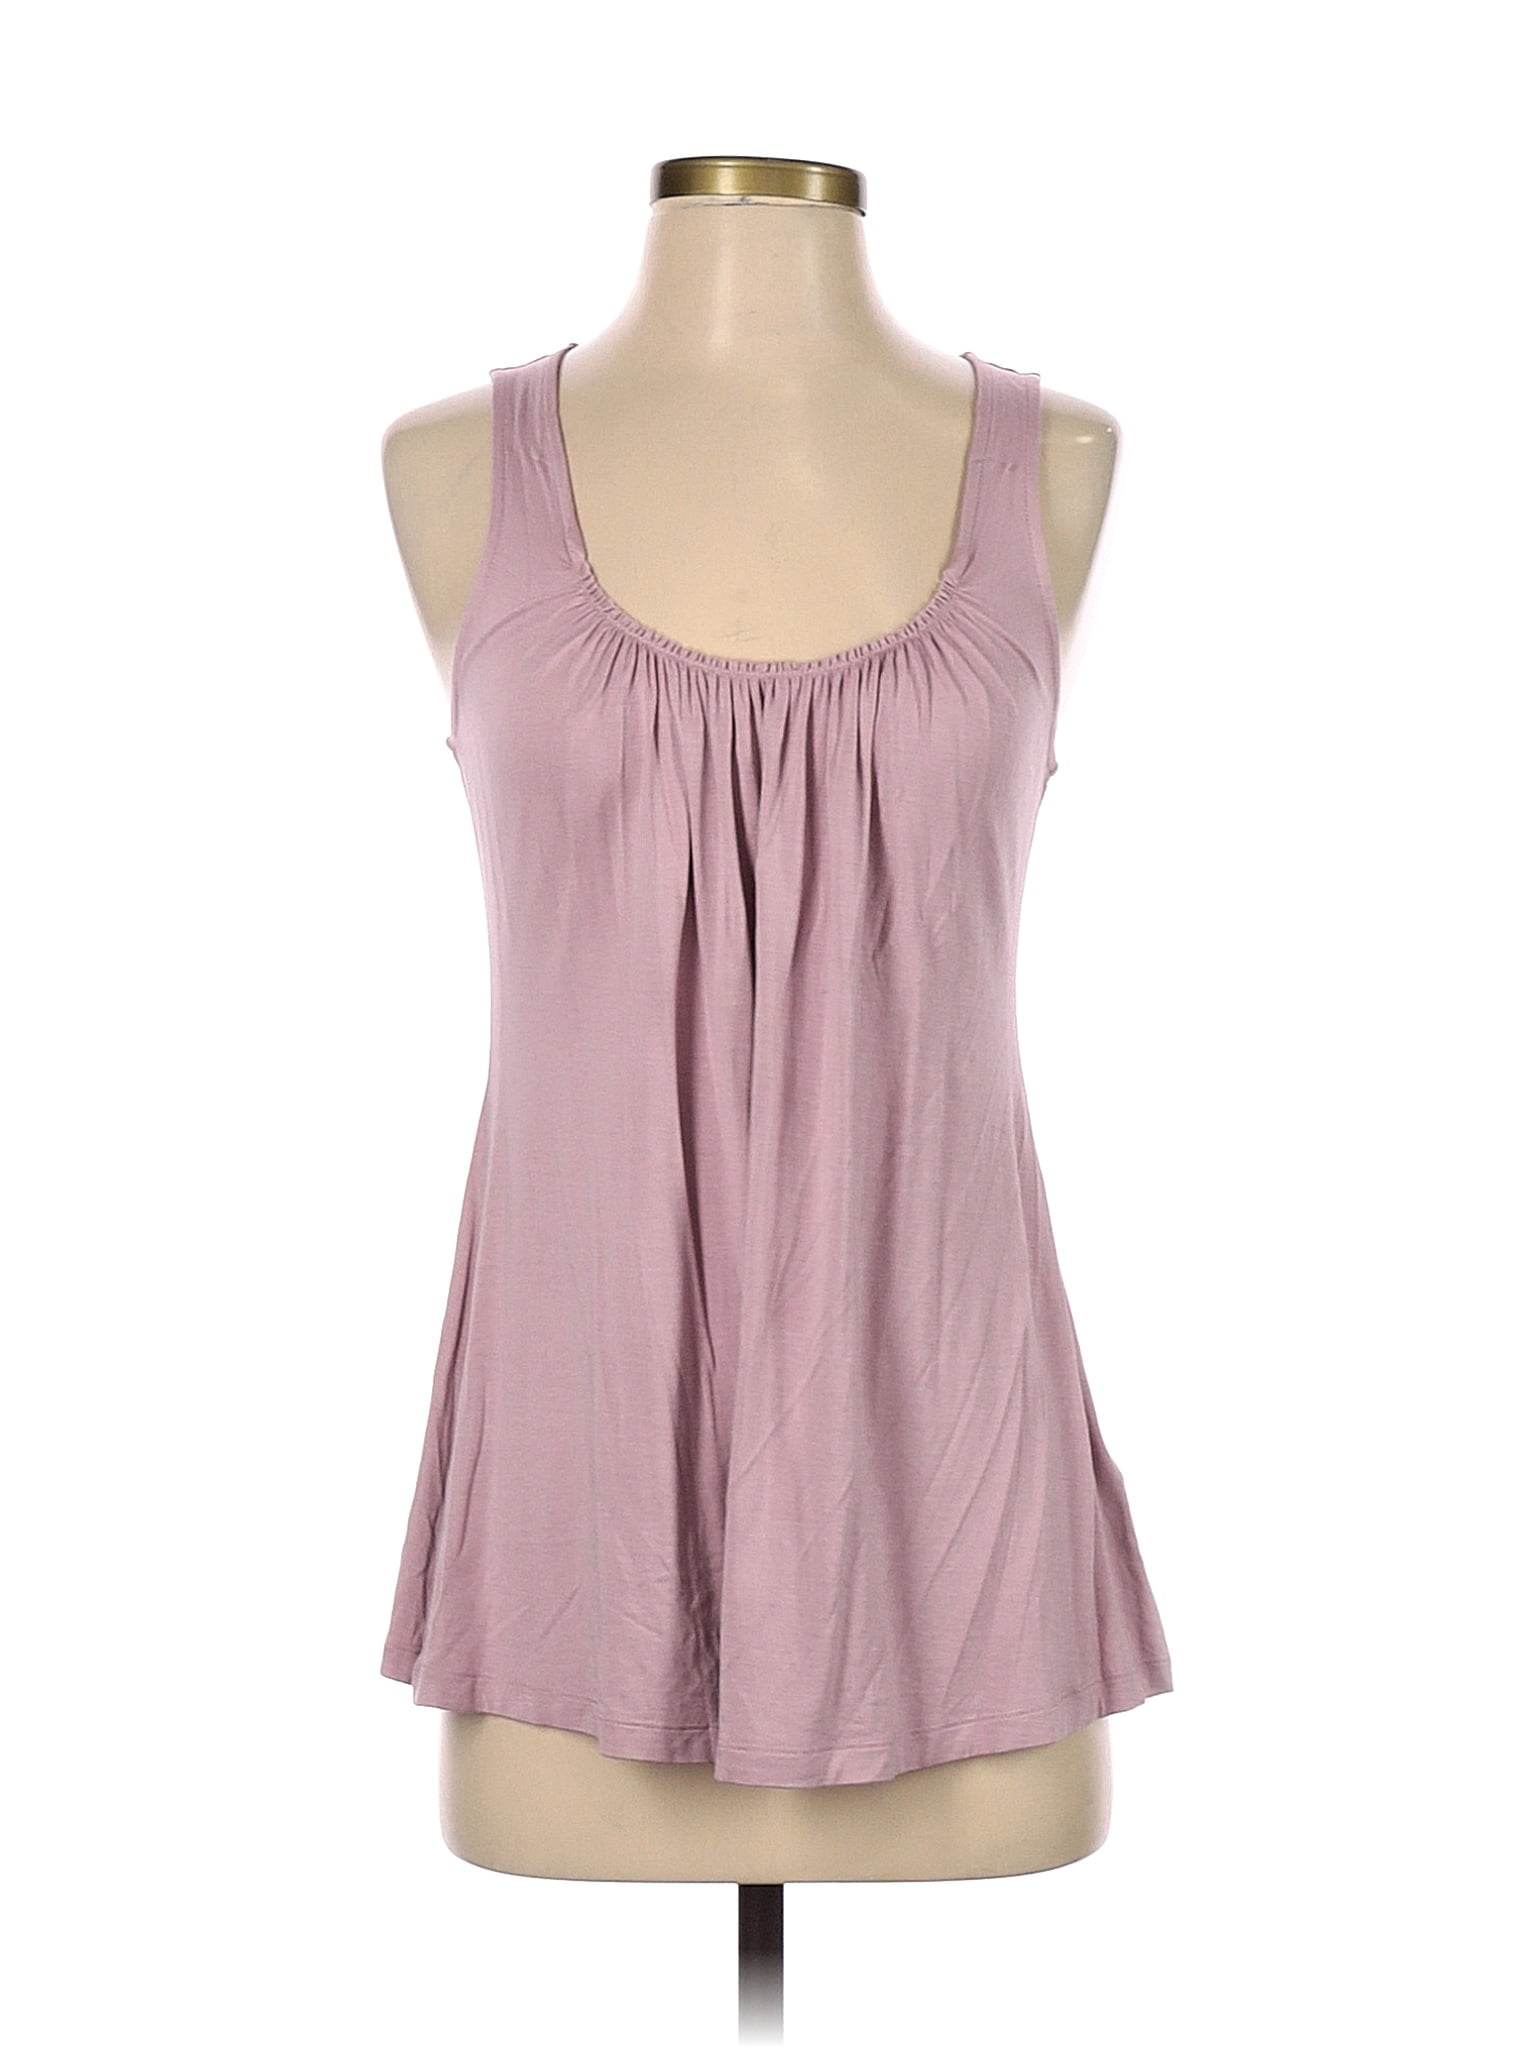 Soft Surroundings Solid Pink Sleeveless Top Size S (Petite) - 88% off ...